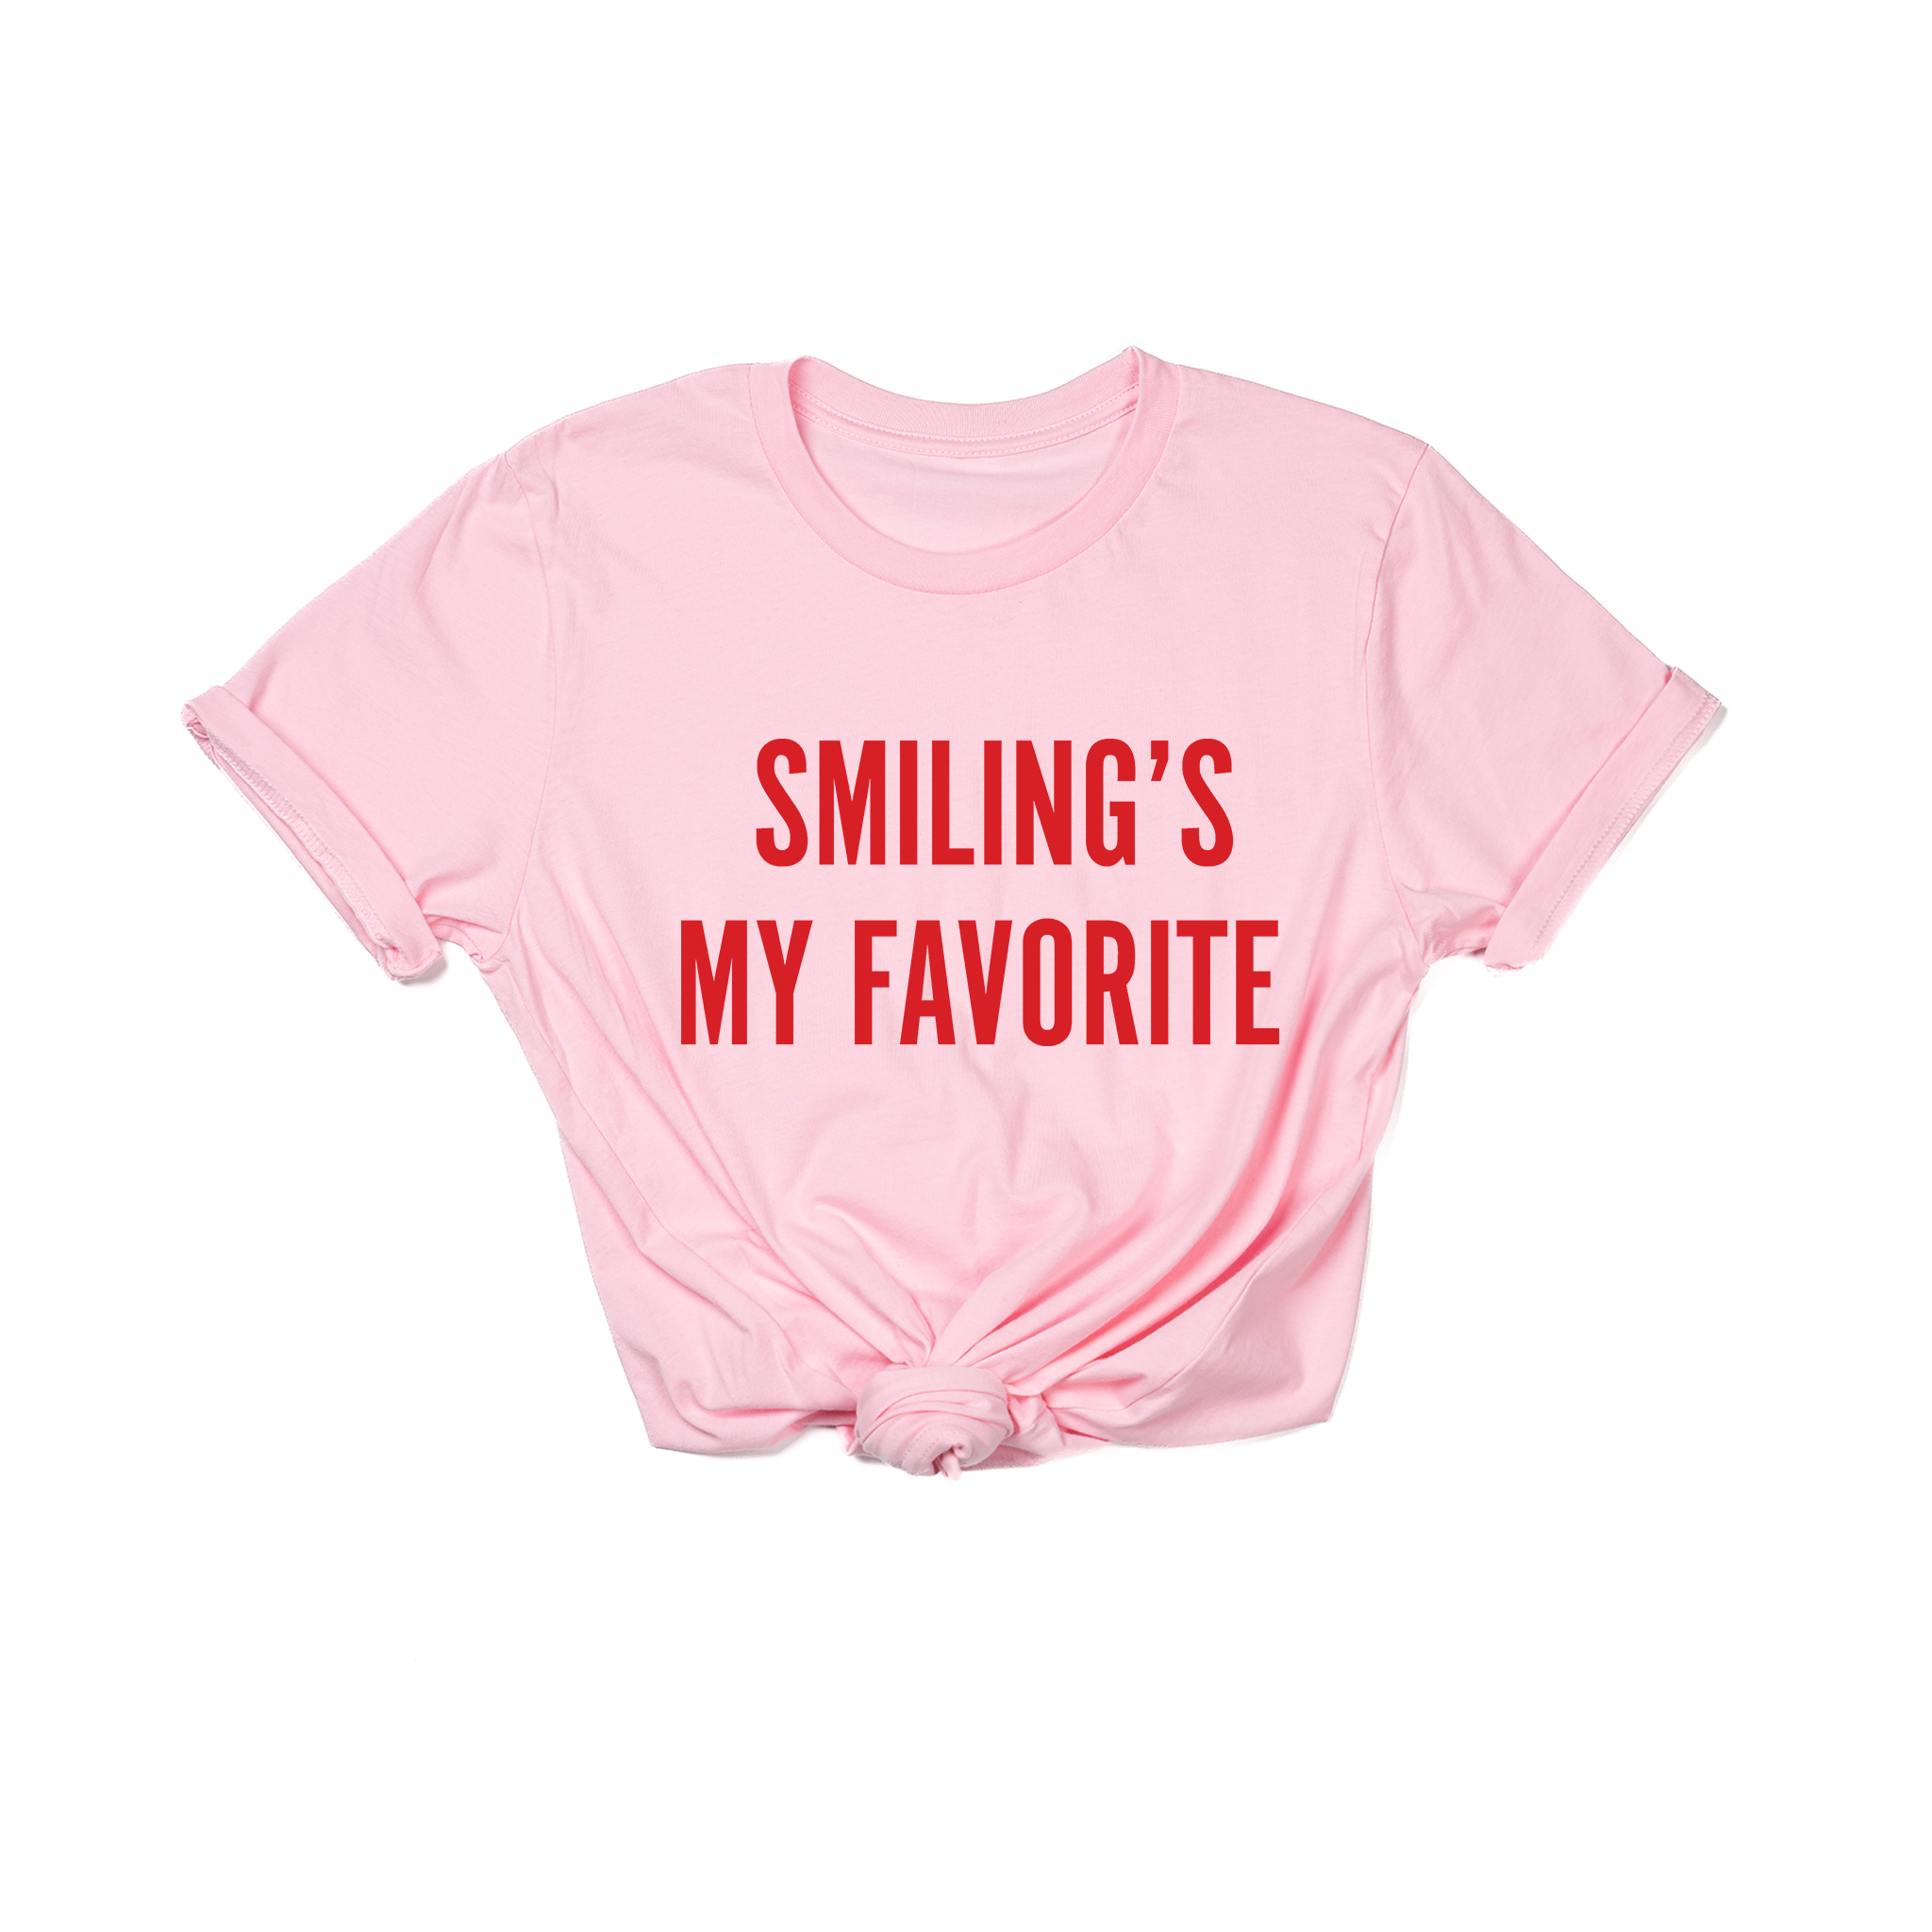 Smilings My Favorite Red Tee Pink Aspen Company